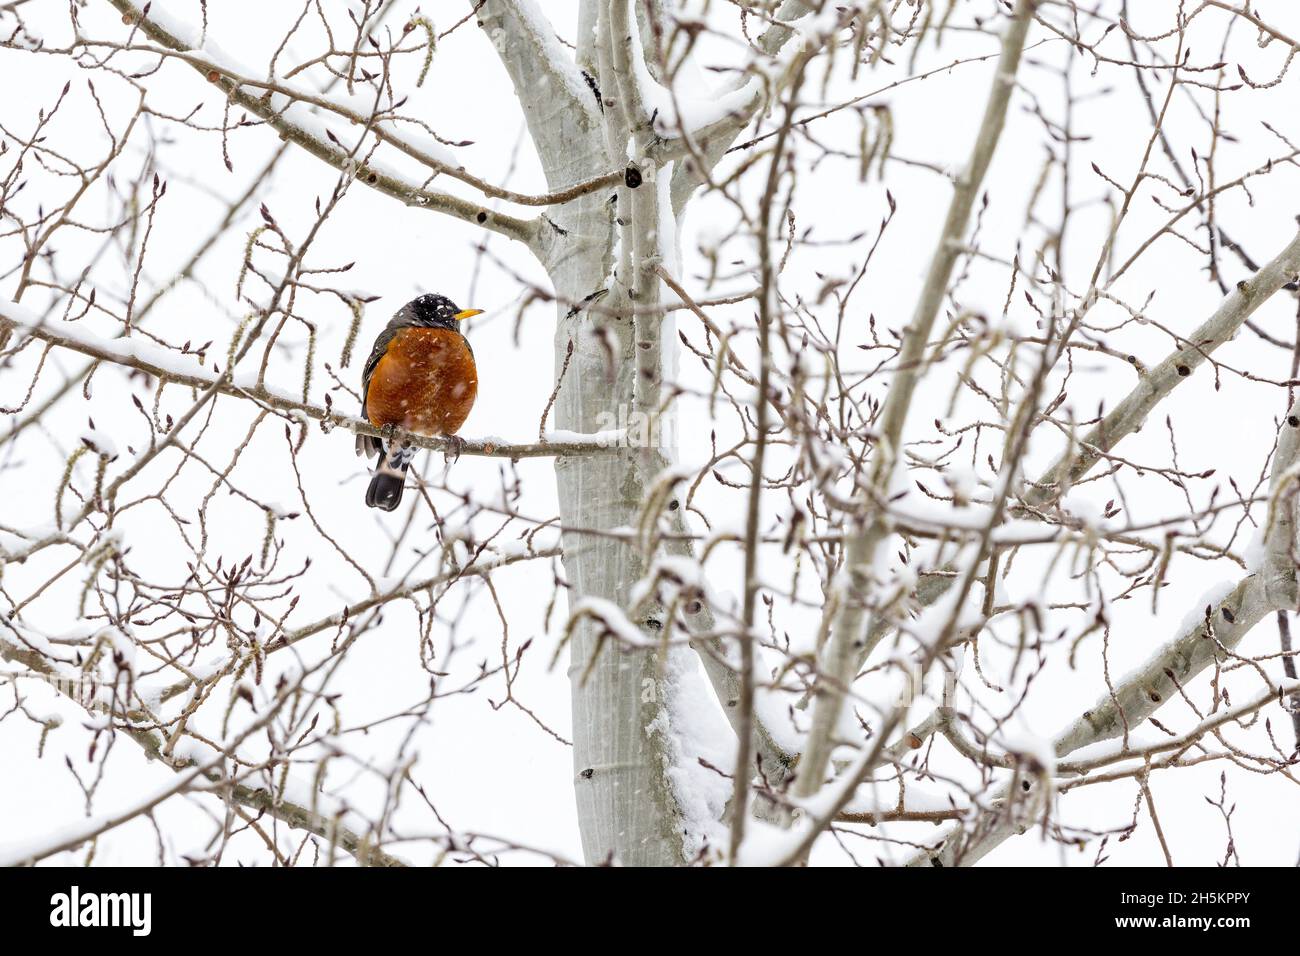 Colourful robin (Turdus migratorius) perched on a snow-covered branch in a snowfall; Calgary, Alberta, Canada Stock Photo